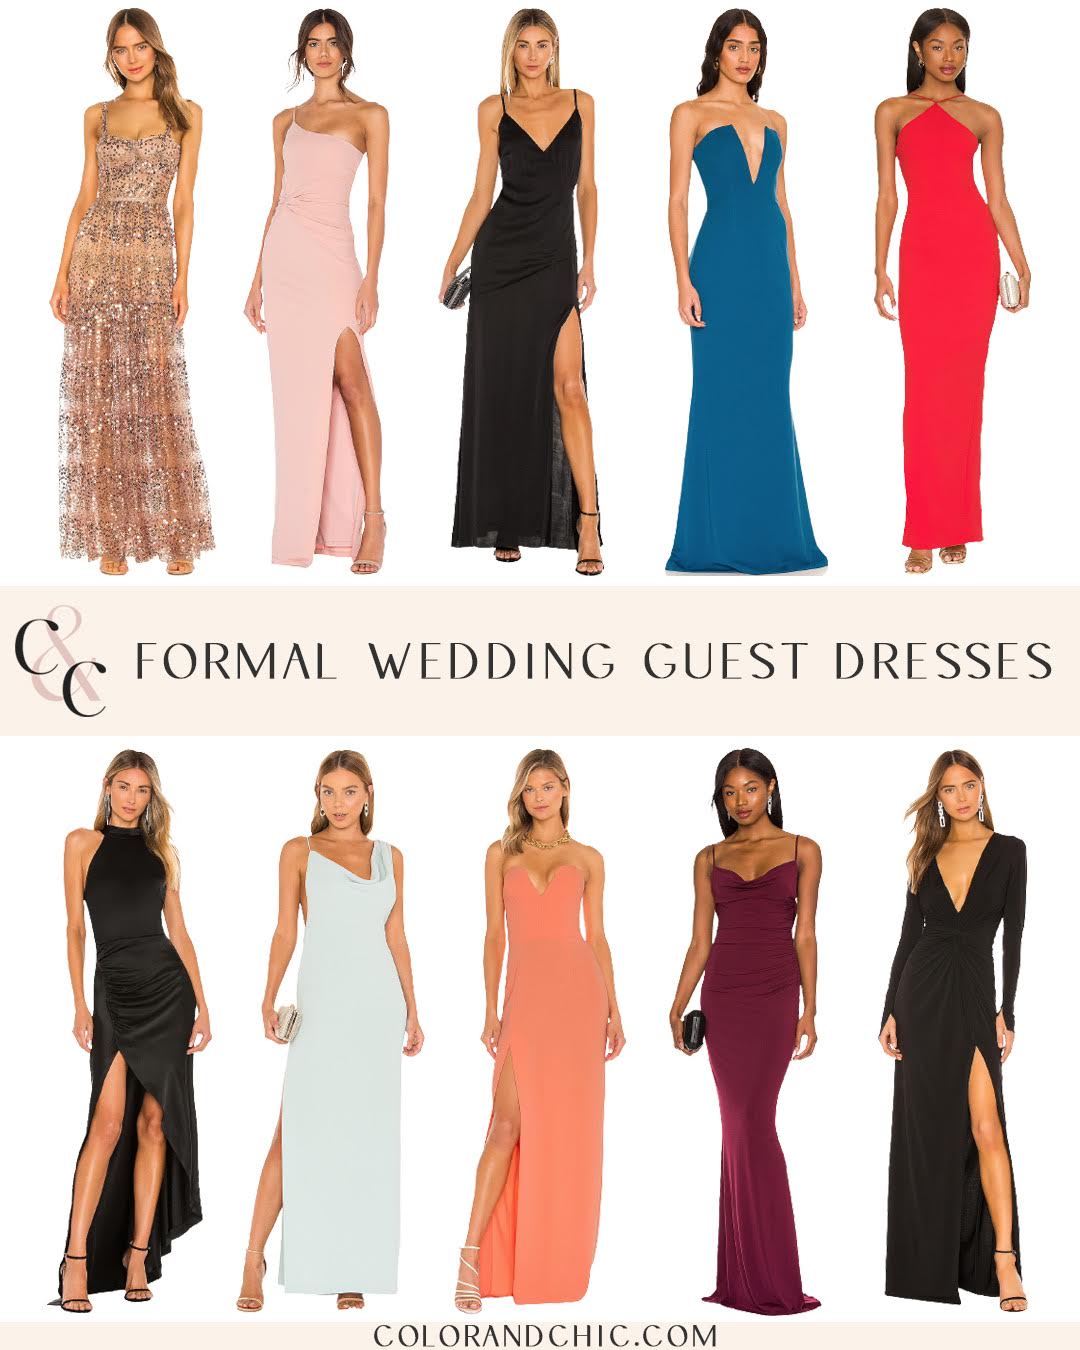 Wedding Dress Code Guide - Color & Chic